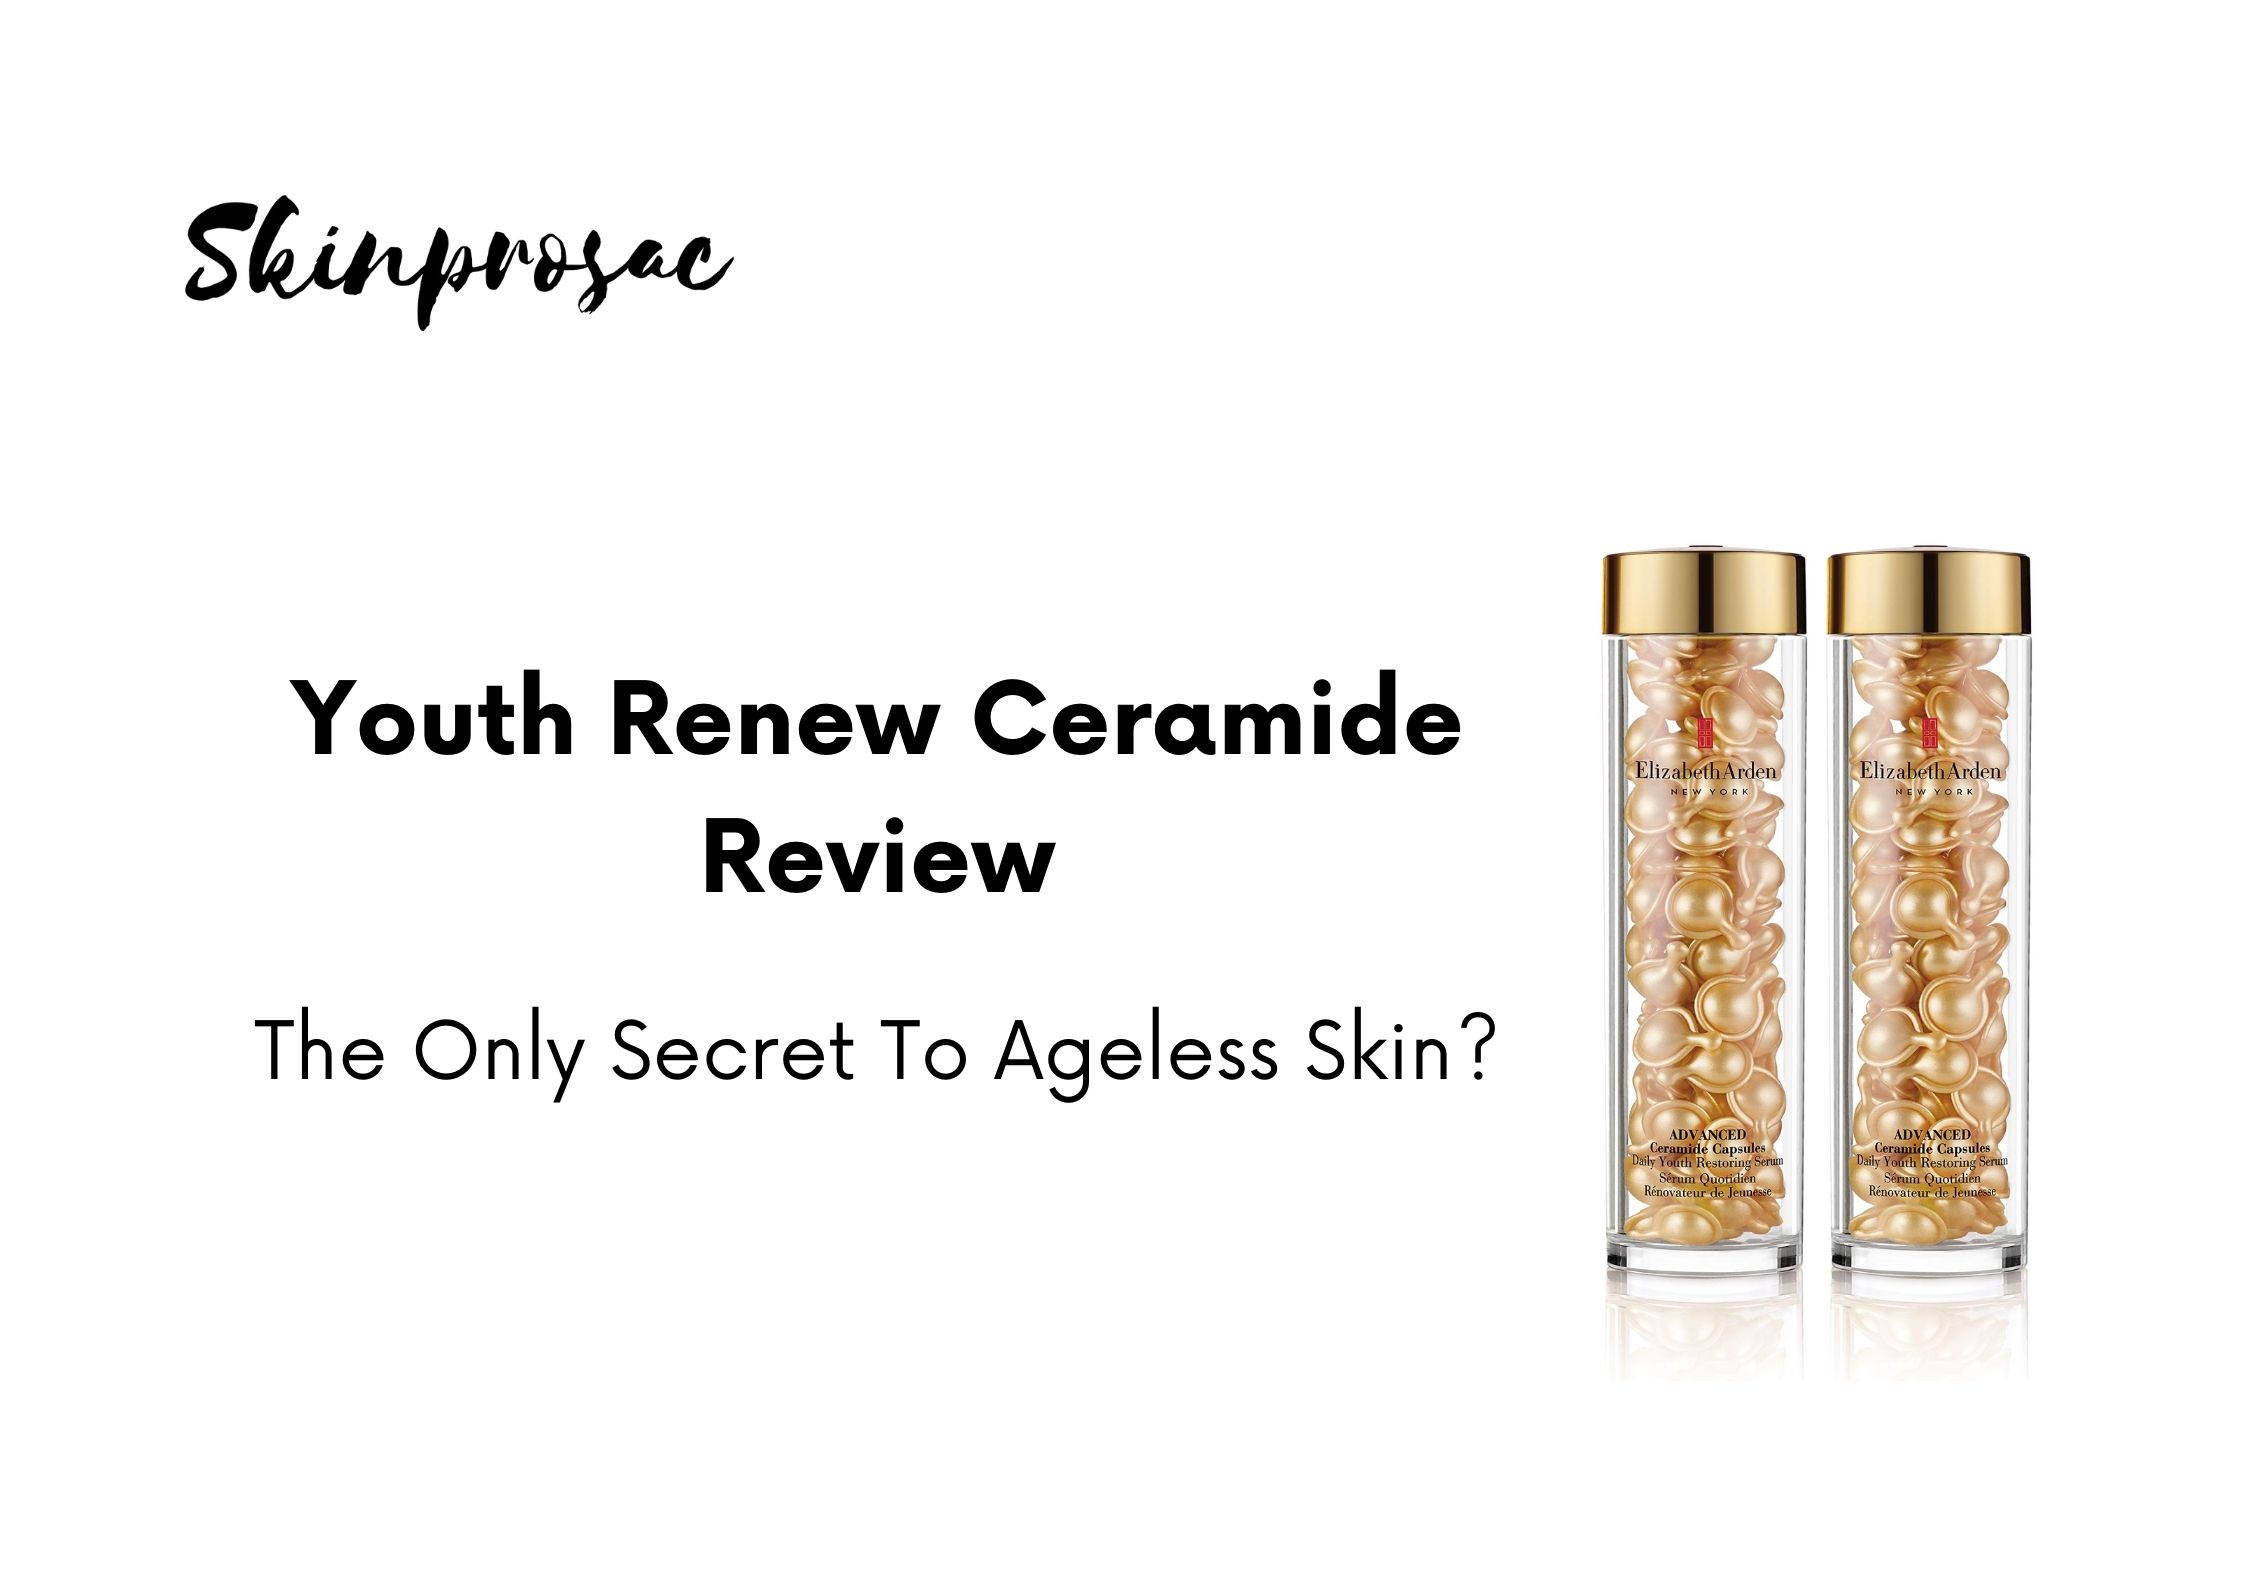 Youth Renew Ceramide Review